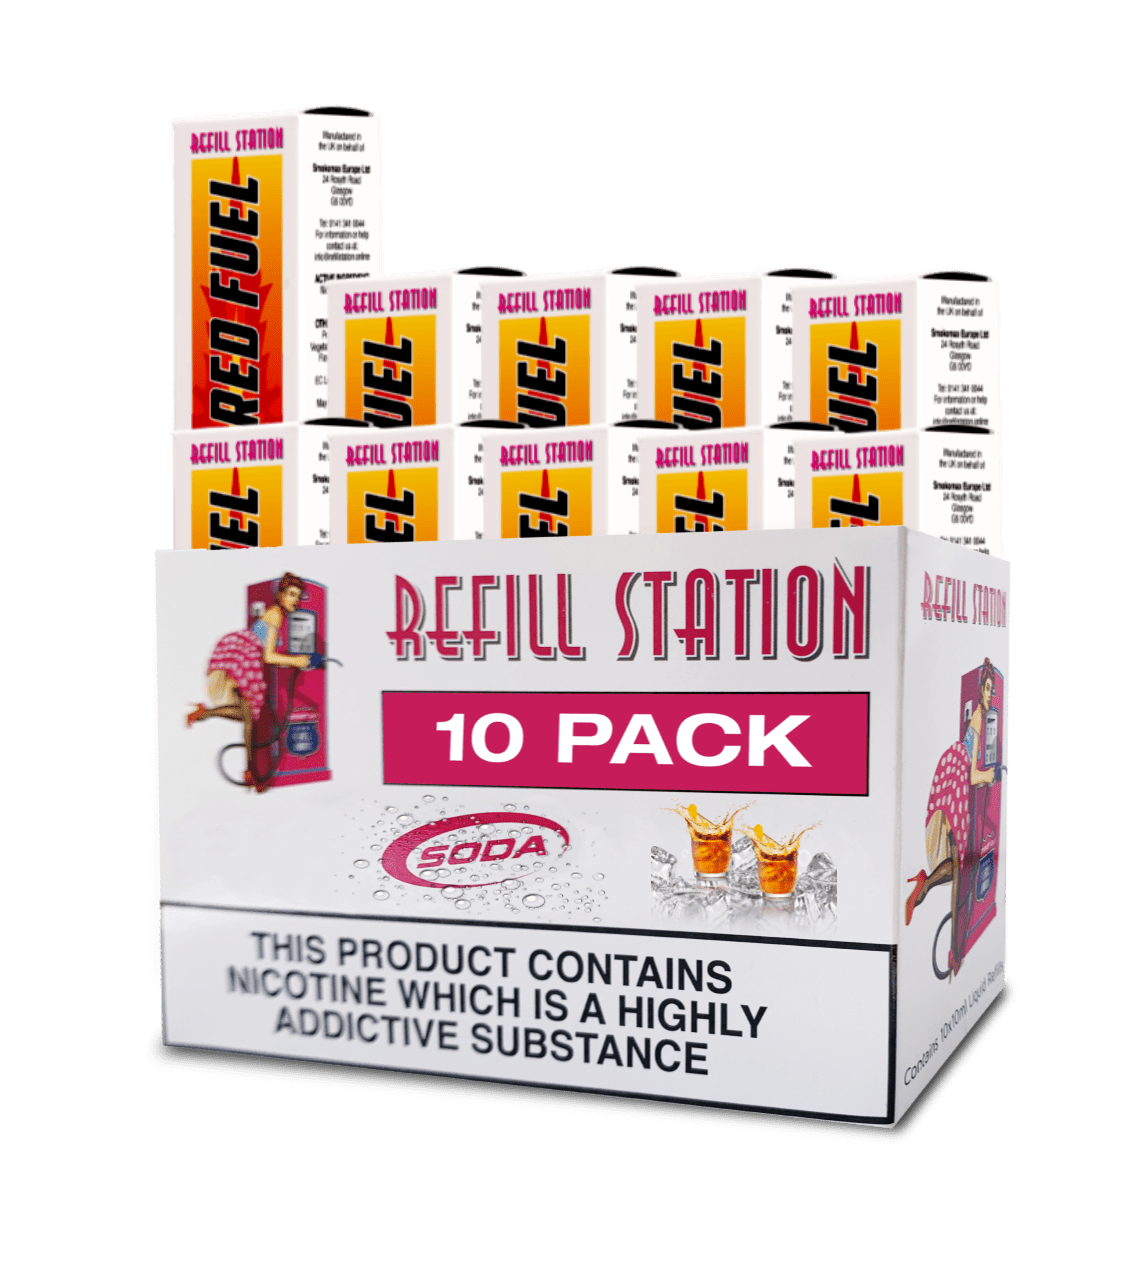 Red Fuel 10 Pack